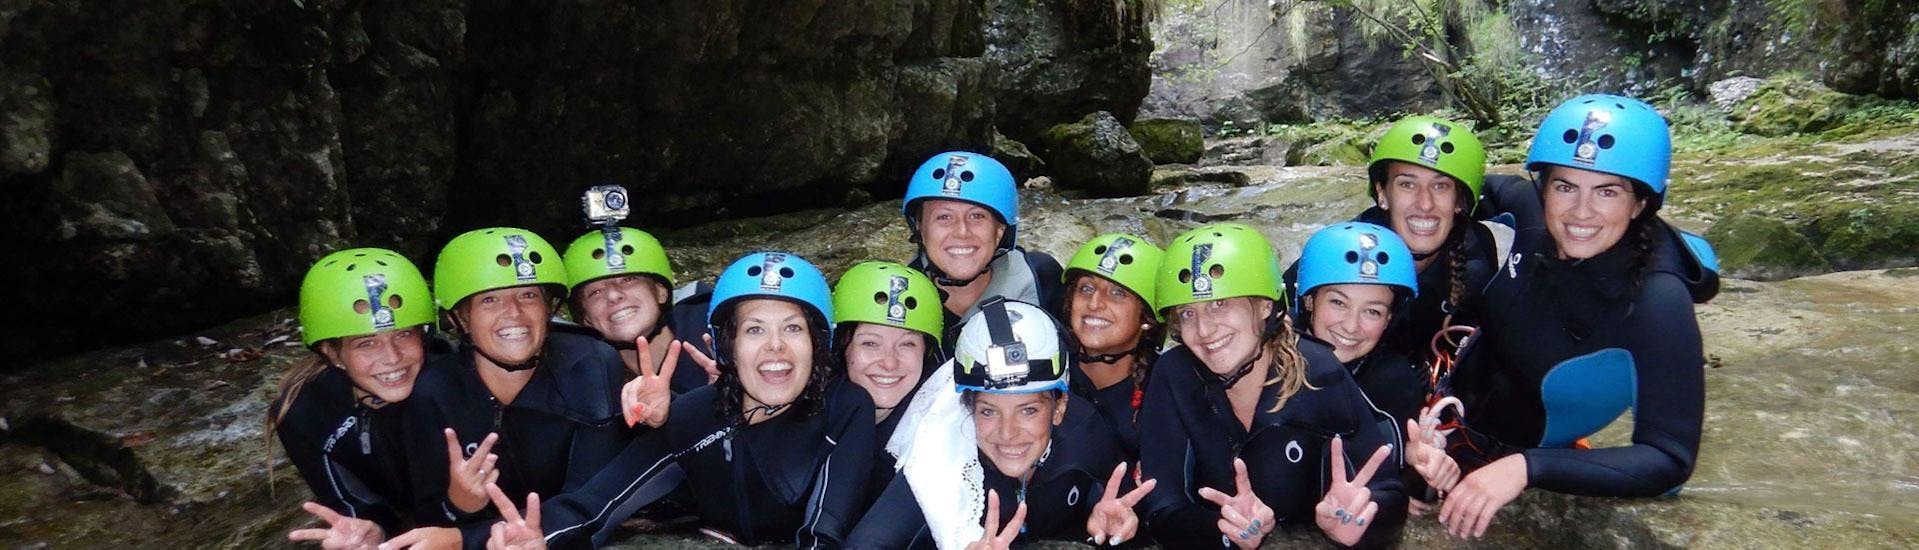 A group of friends is having fun in the canyon during the Canyoning in Torrente Tignale organized by LOLgarda.